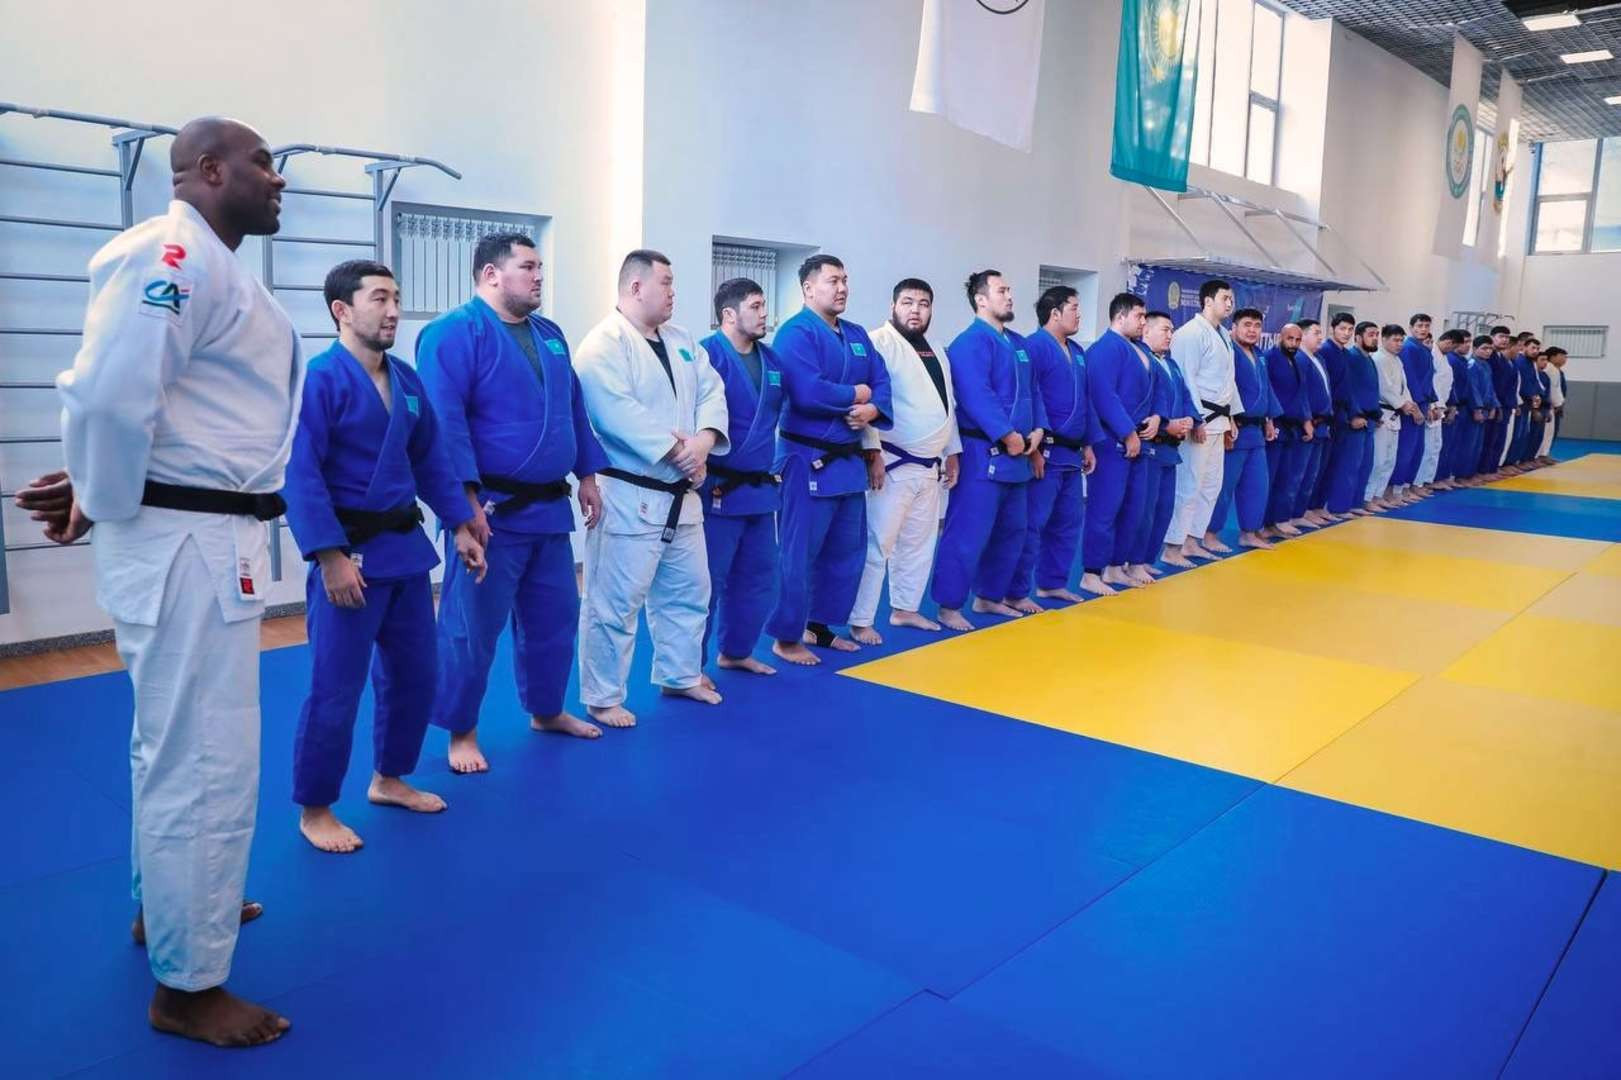 
Teddy Riner will be hoping to make the most of the camp to prepare for the IJF Grand Slam in Paris in February ©IJF